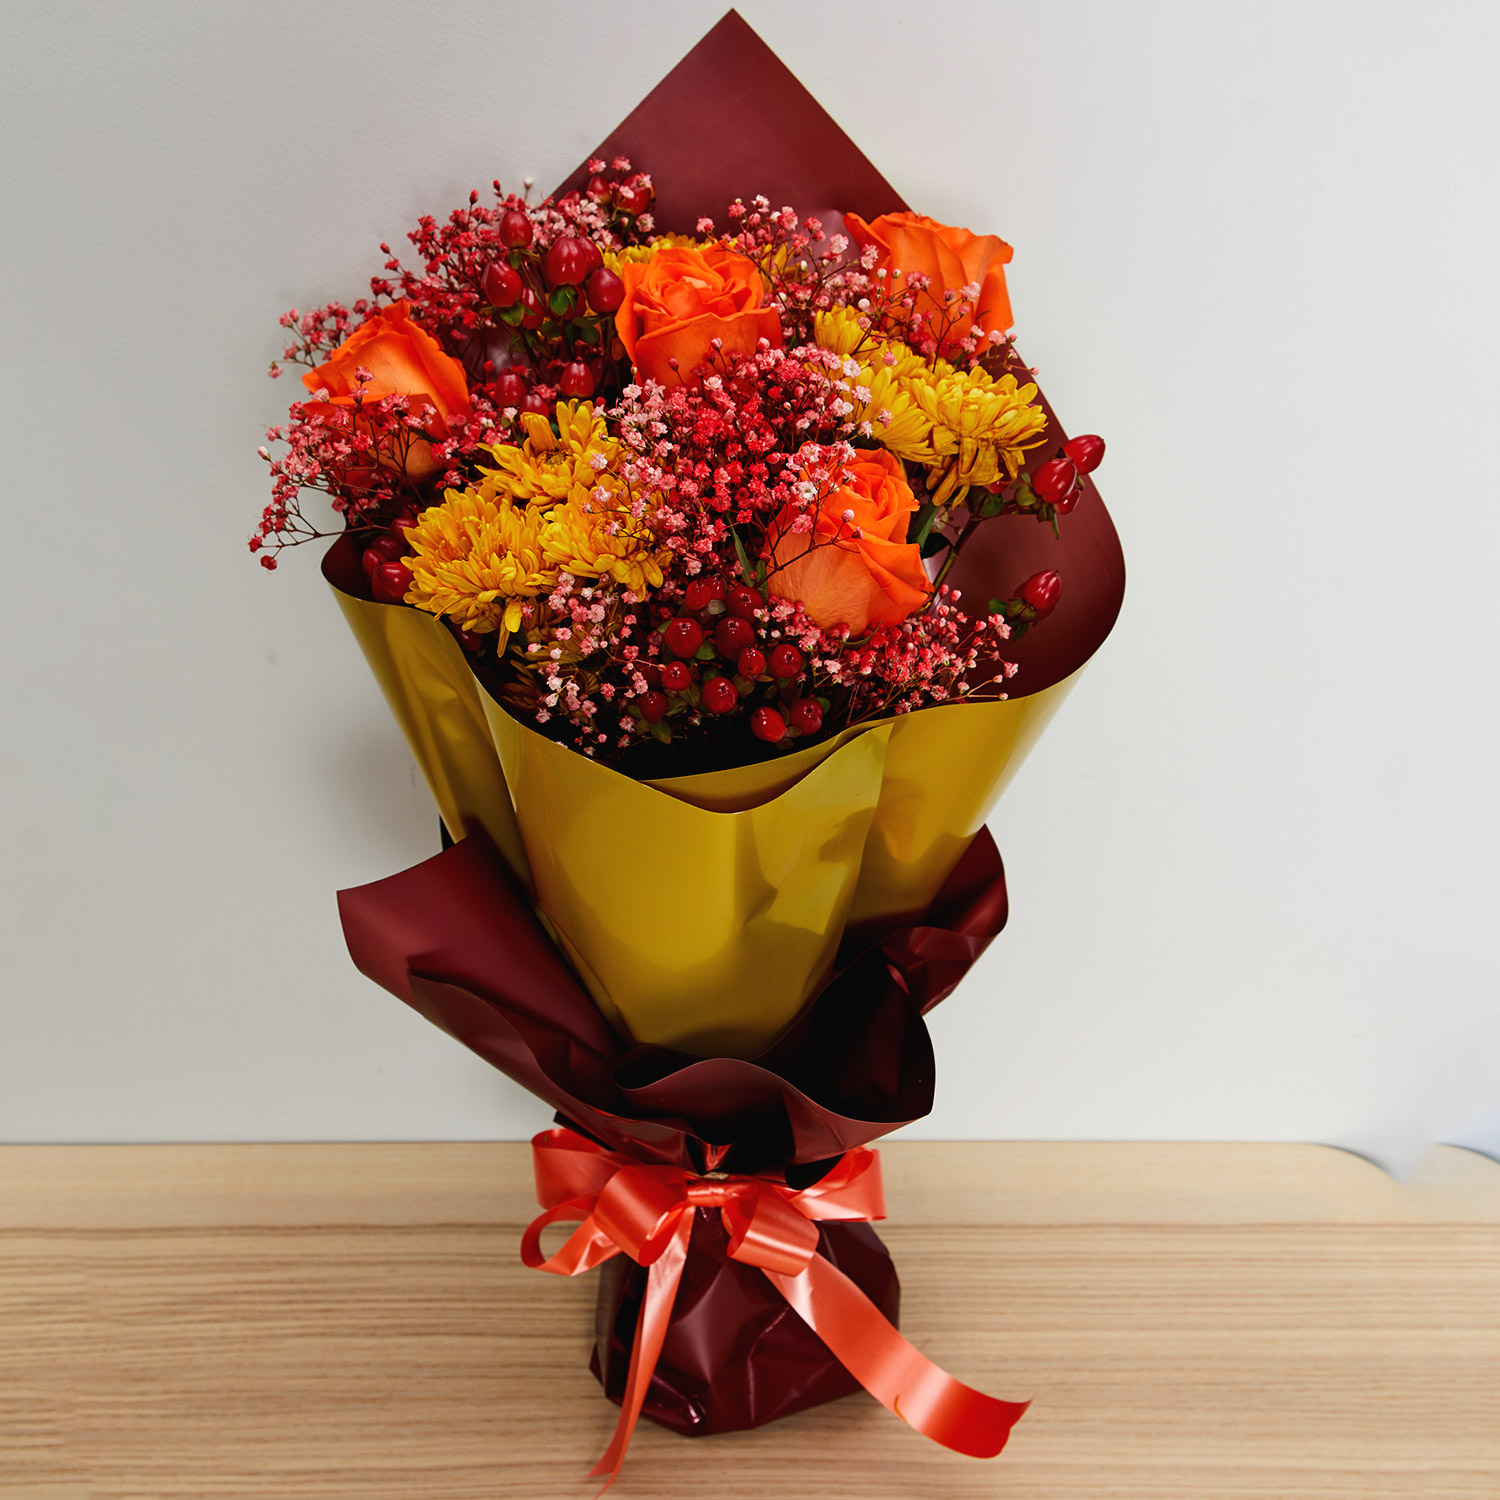 Online Orange & Red Flowers Bouquet Gift Delivery in Singapore - Ferns ...